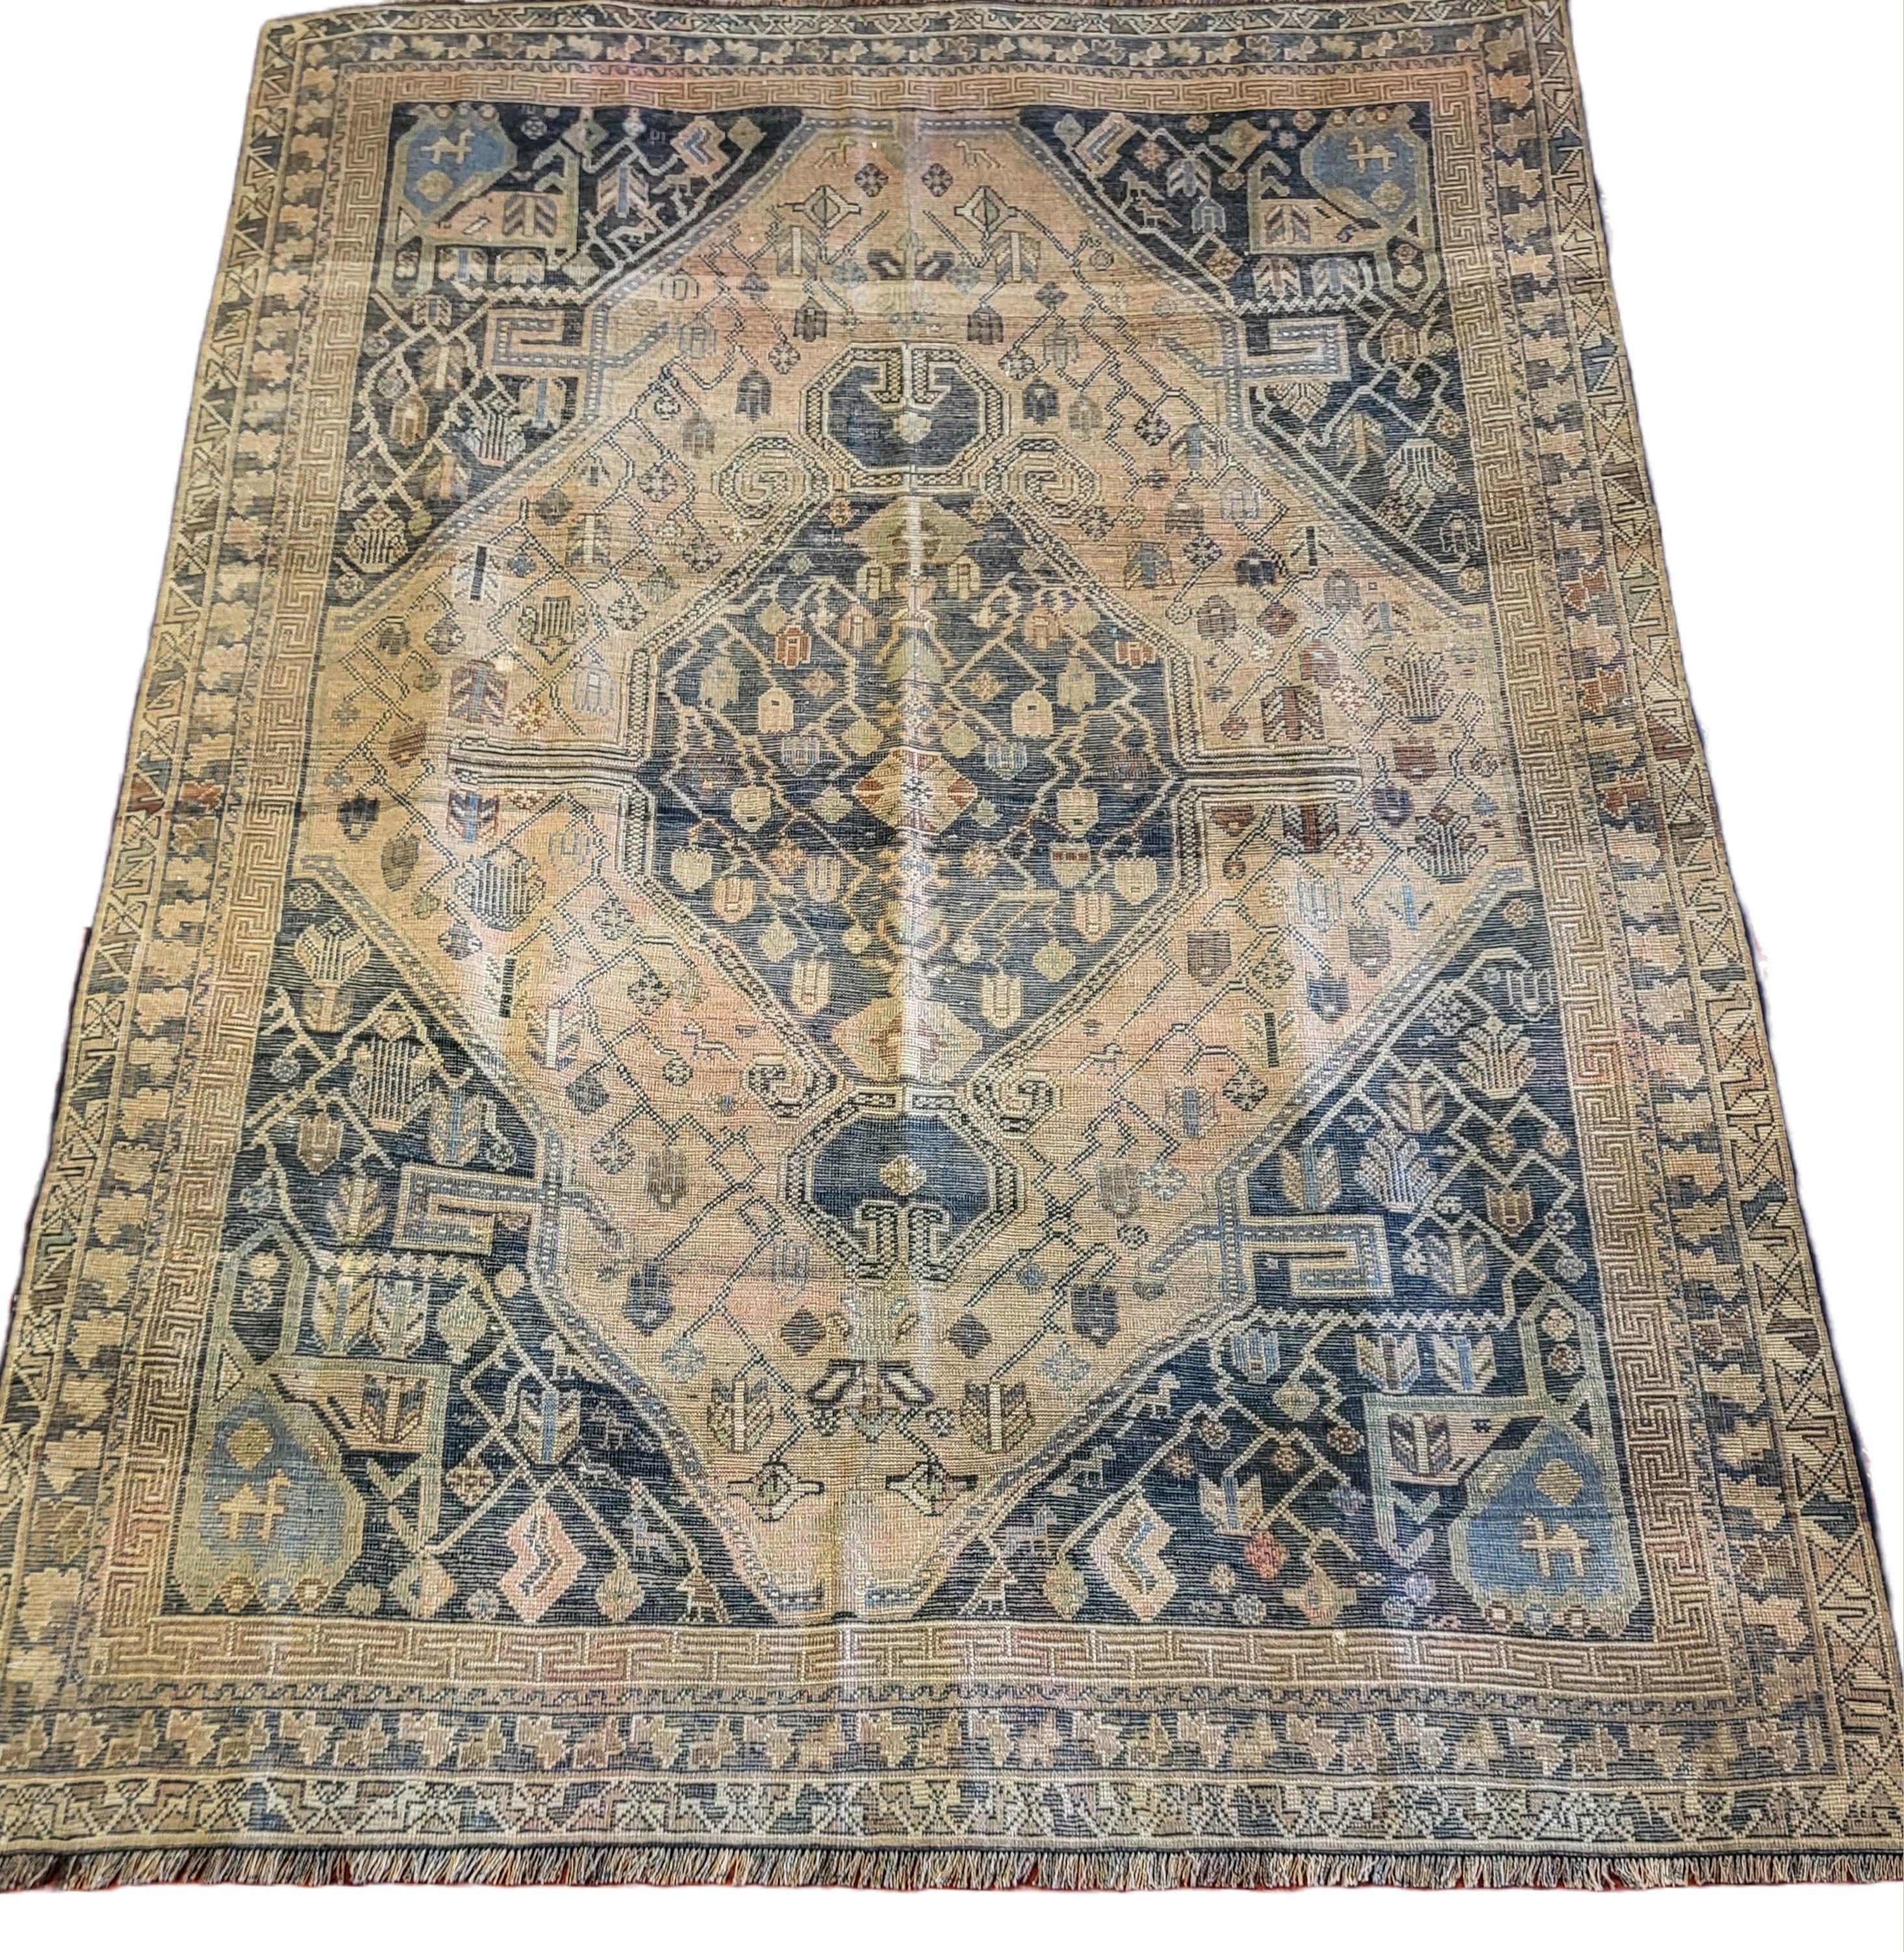 Incredible 19th Century Lori

7' x 9' 

Made entirely of persian wool: raised, sheared, dyed, spun, and handwoven by the ancient nomadic tribe known as the Lores. The Lores are one of the most ancient and renowned nomadic weavers, along side the